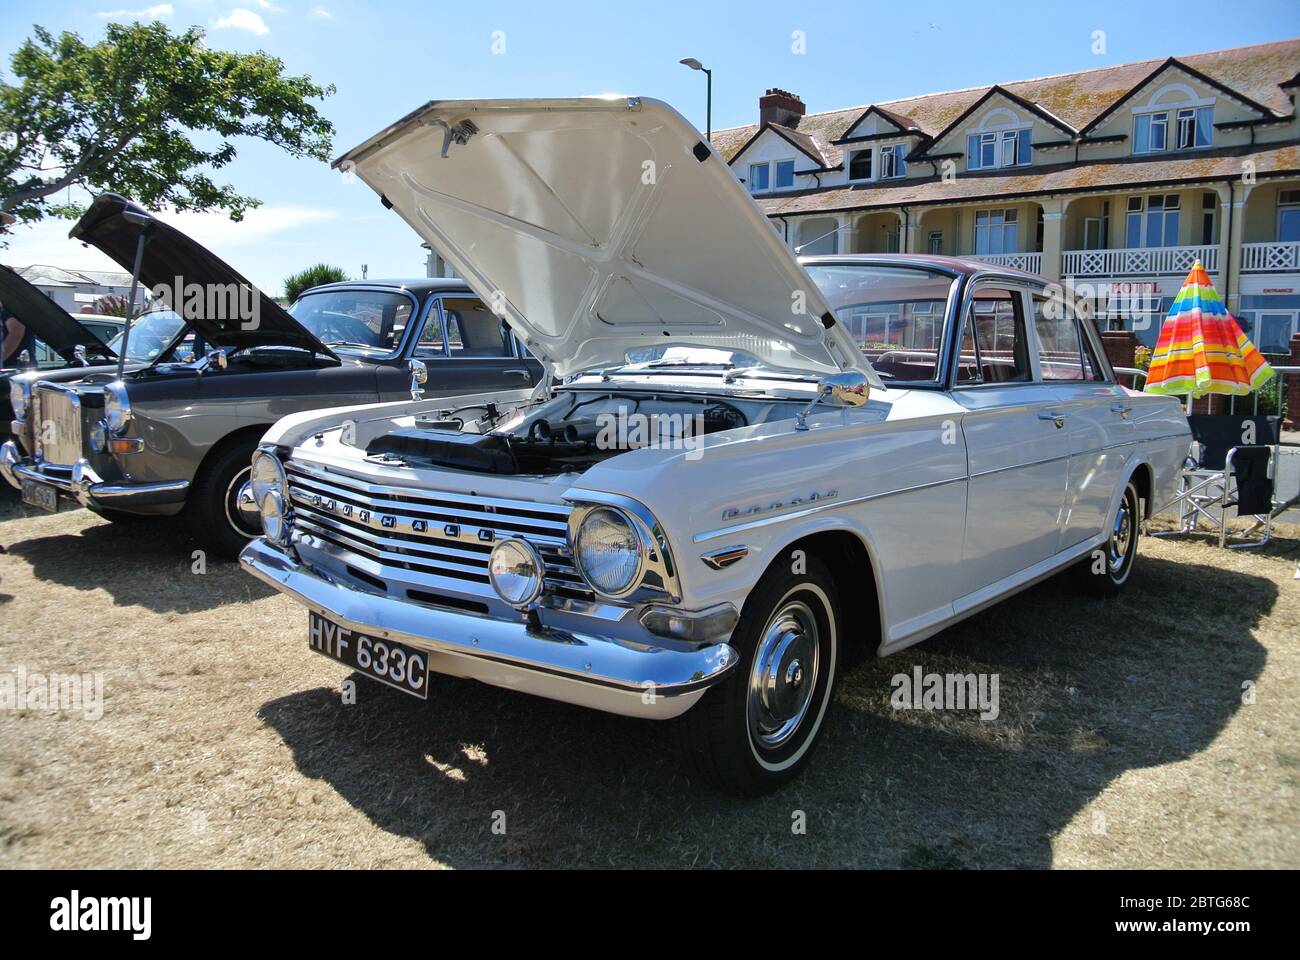 A 1965 Vauxhall Cresta parked up on display at the English Riviera classic car show, Paignton, Devon, England, UK. Stock Photo